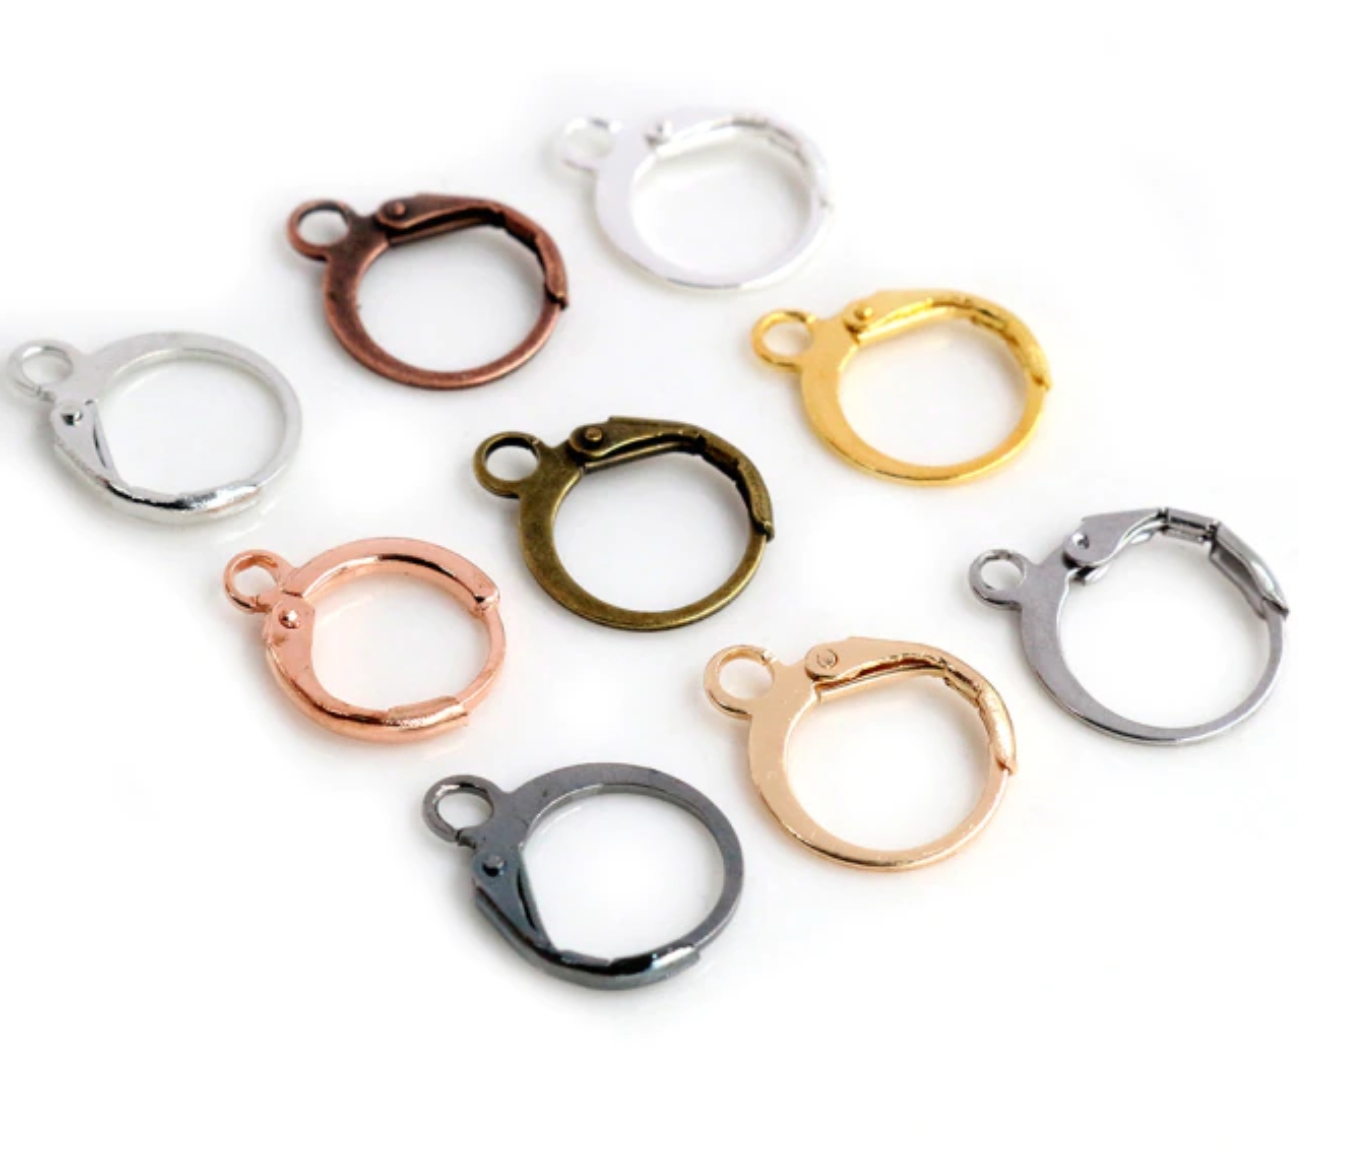 4pcs, 14x12mm,  High Quality Lead Free and Nickel Free Copper French Earwire Leverback earring - choose your colour